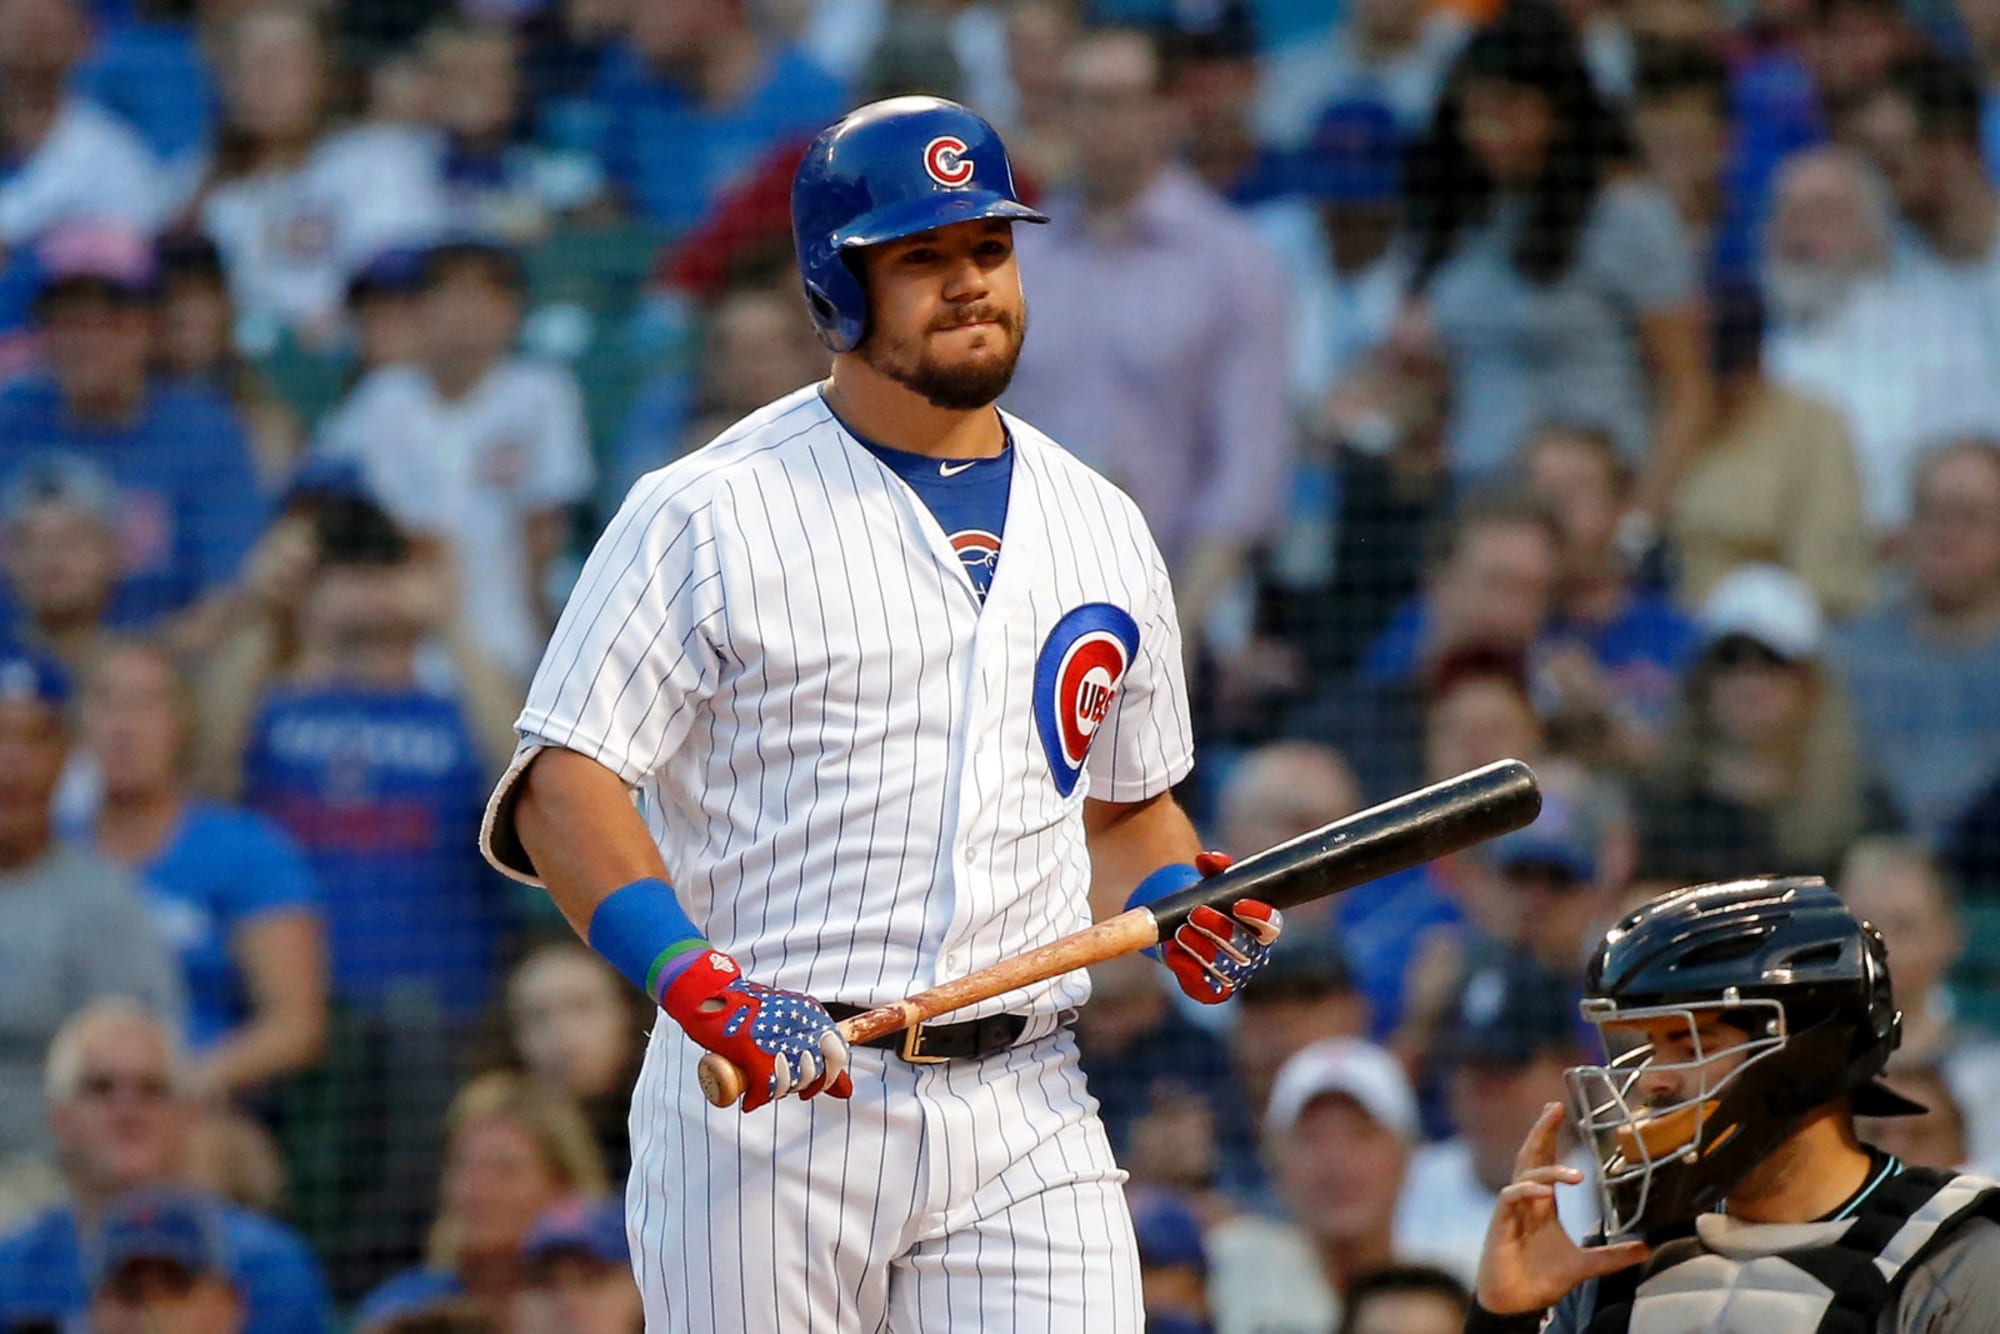 Cubs 2019 preview: Kyle Schwarber knows who he is, won't let others define  him - Chicago Sun-Times